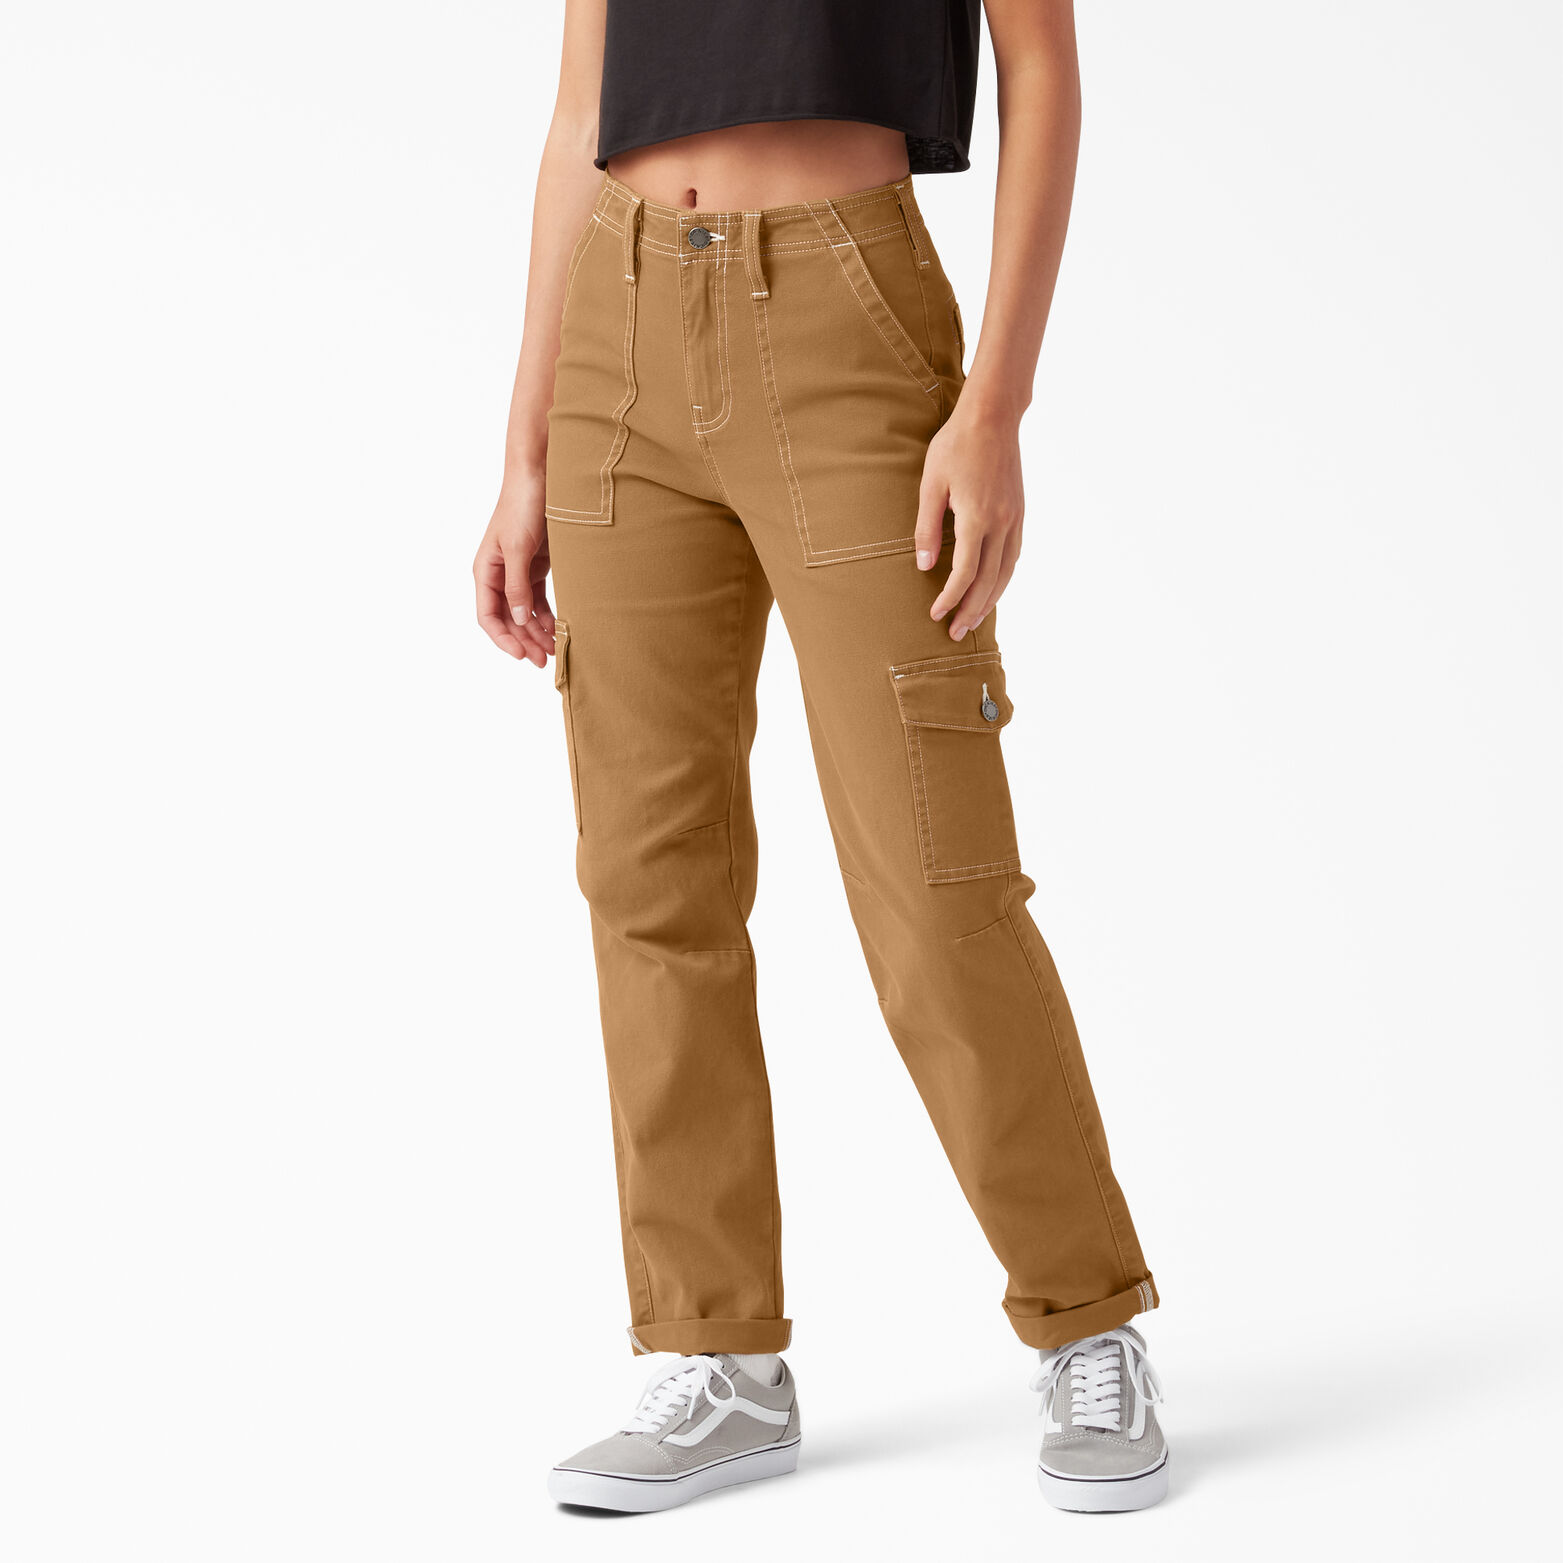 Fit Cuffed Cargo Pants - US